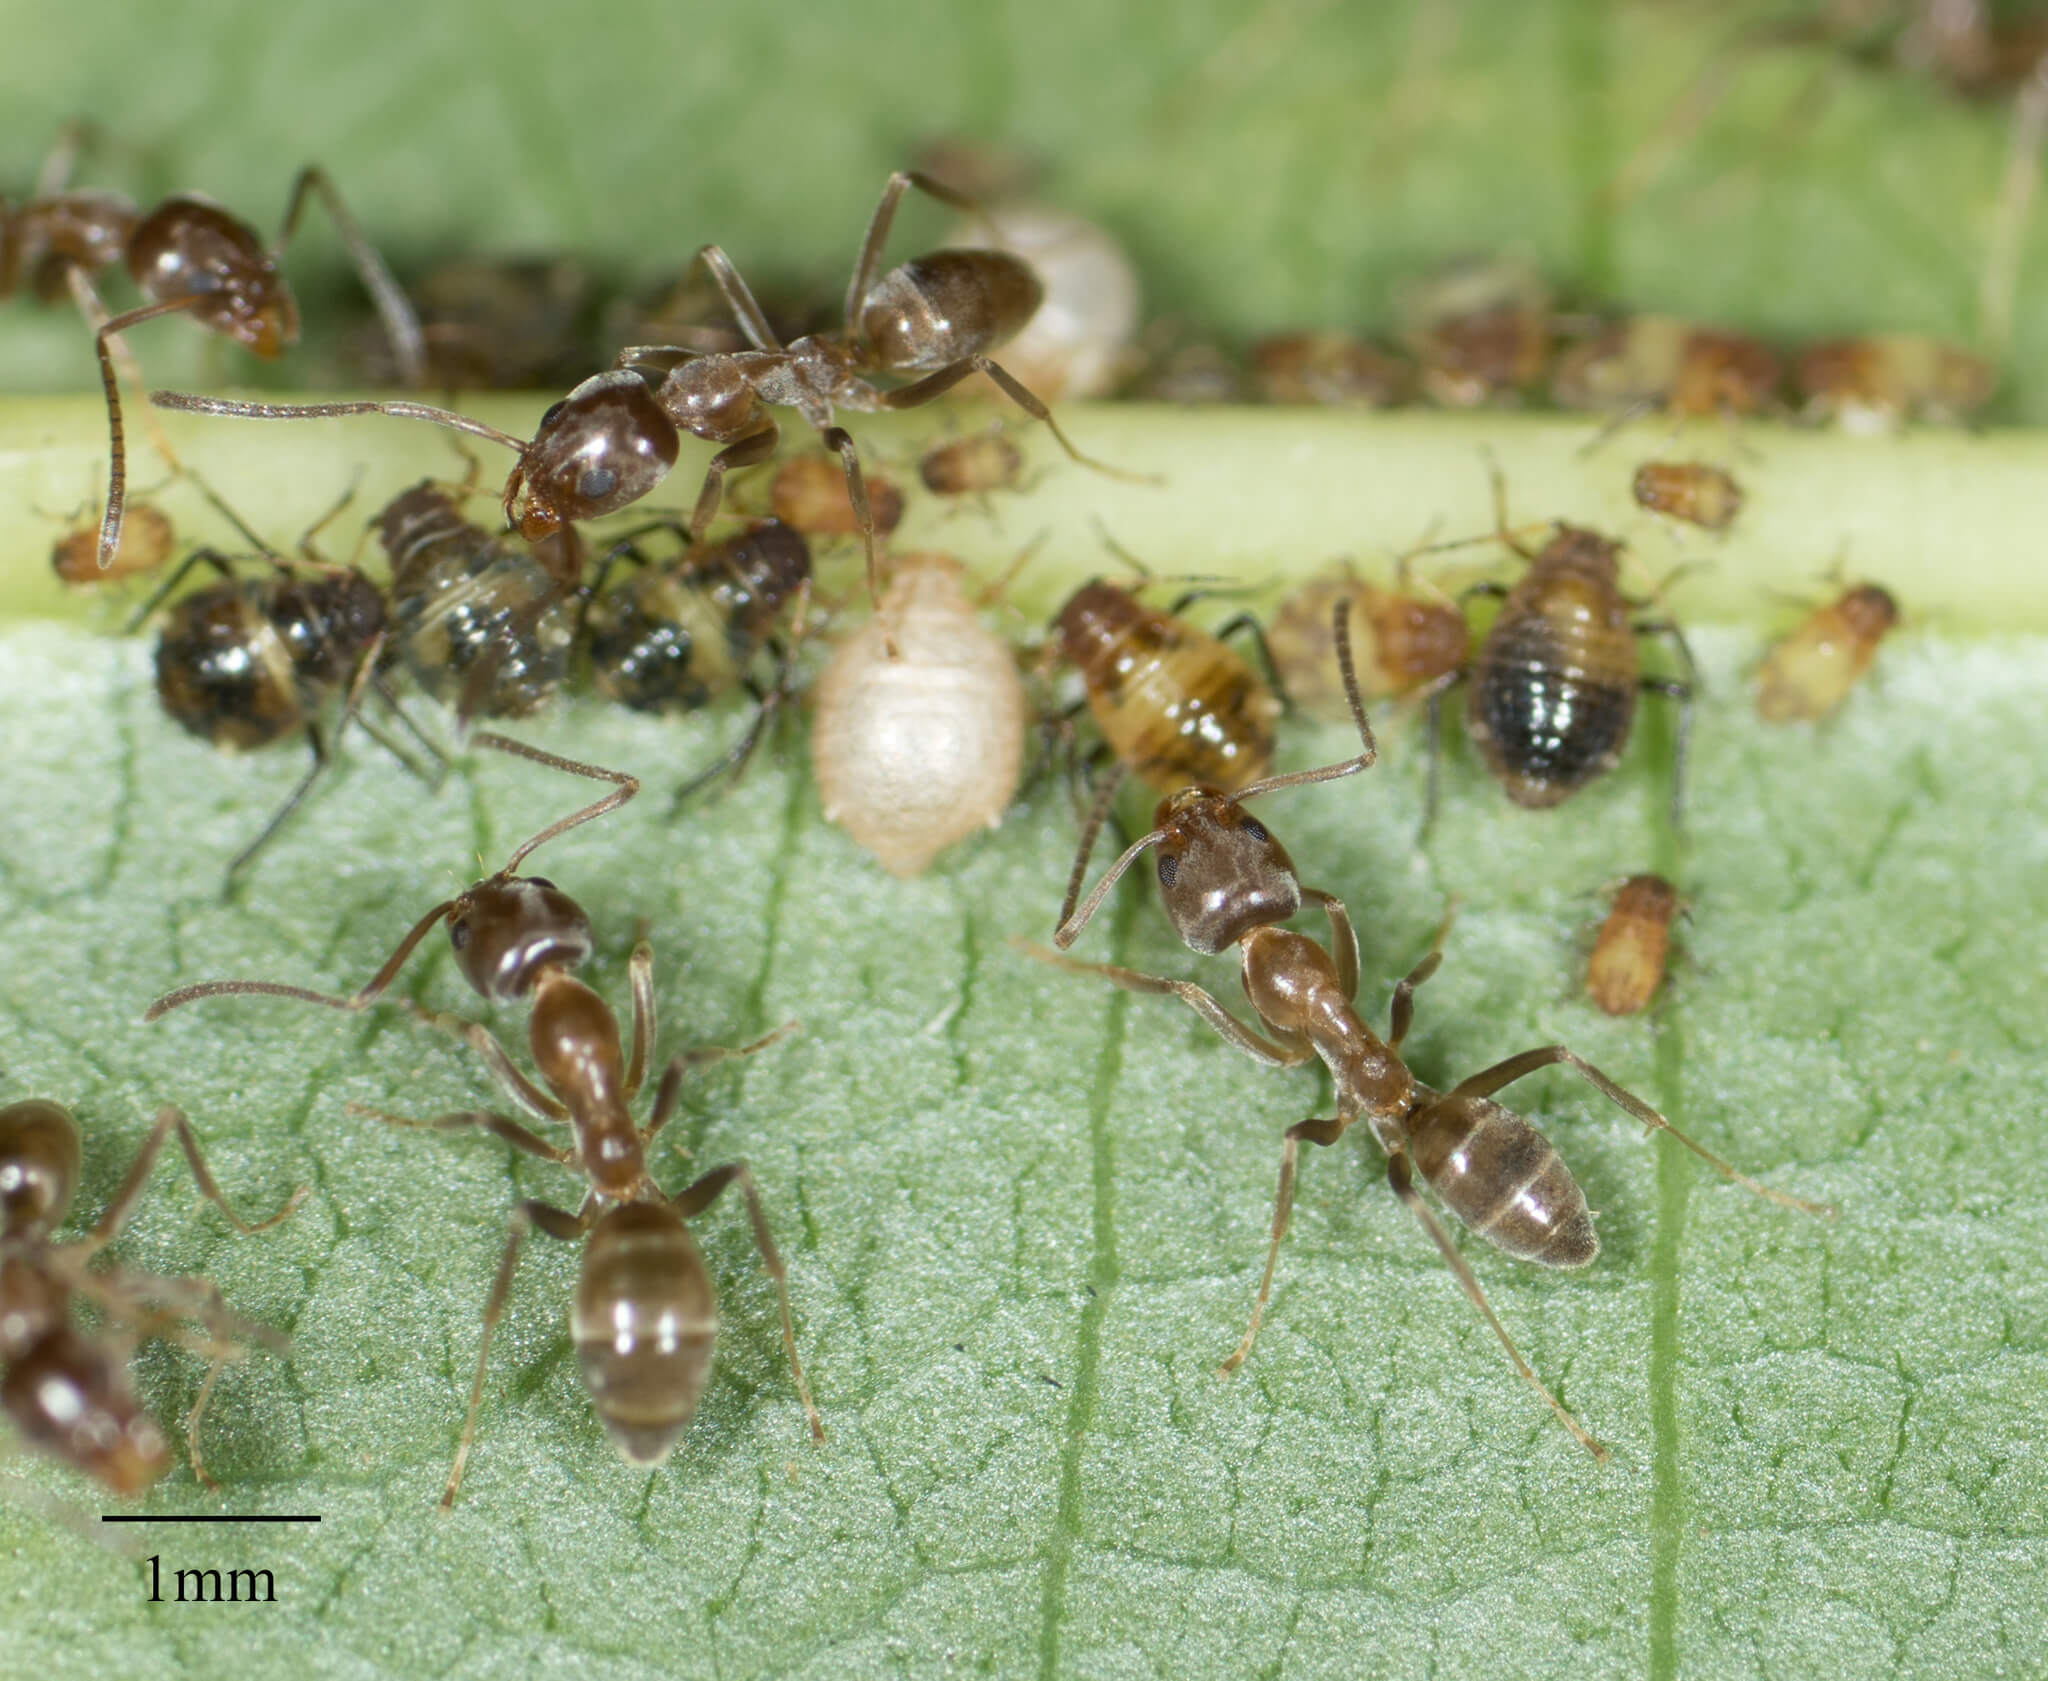 Group of Argentine ants